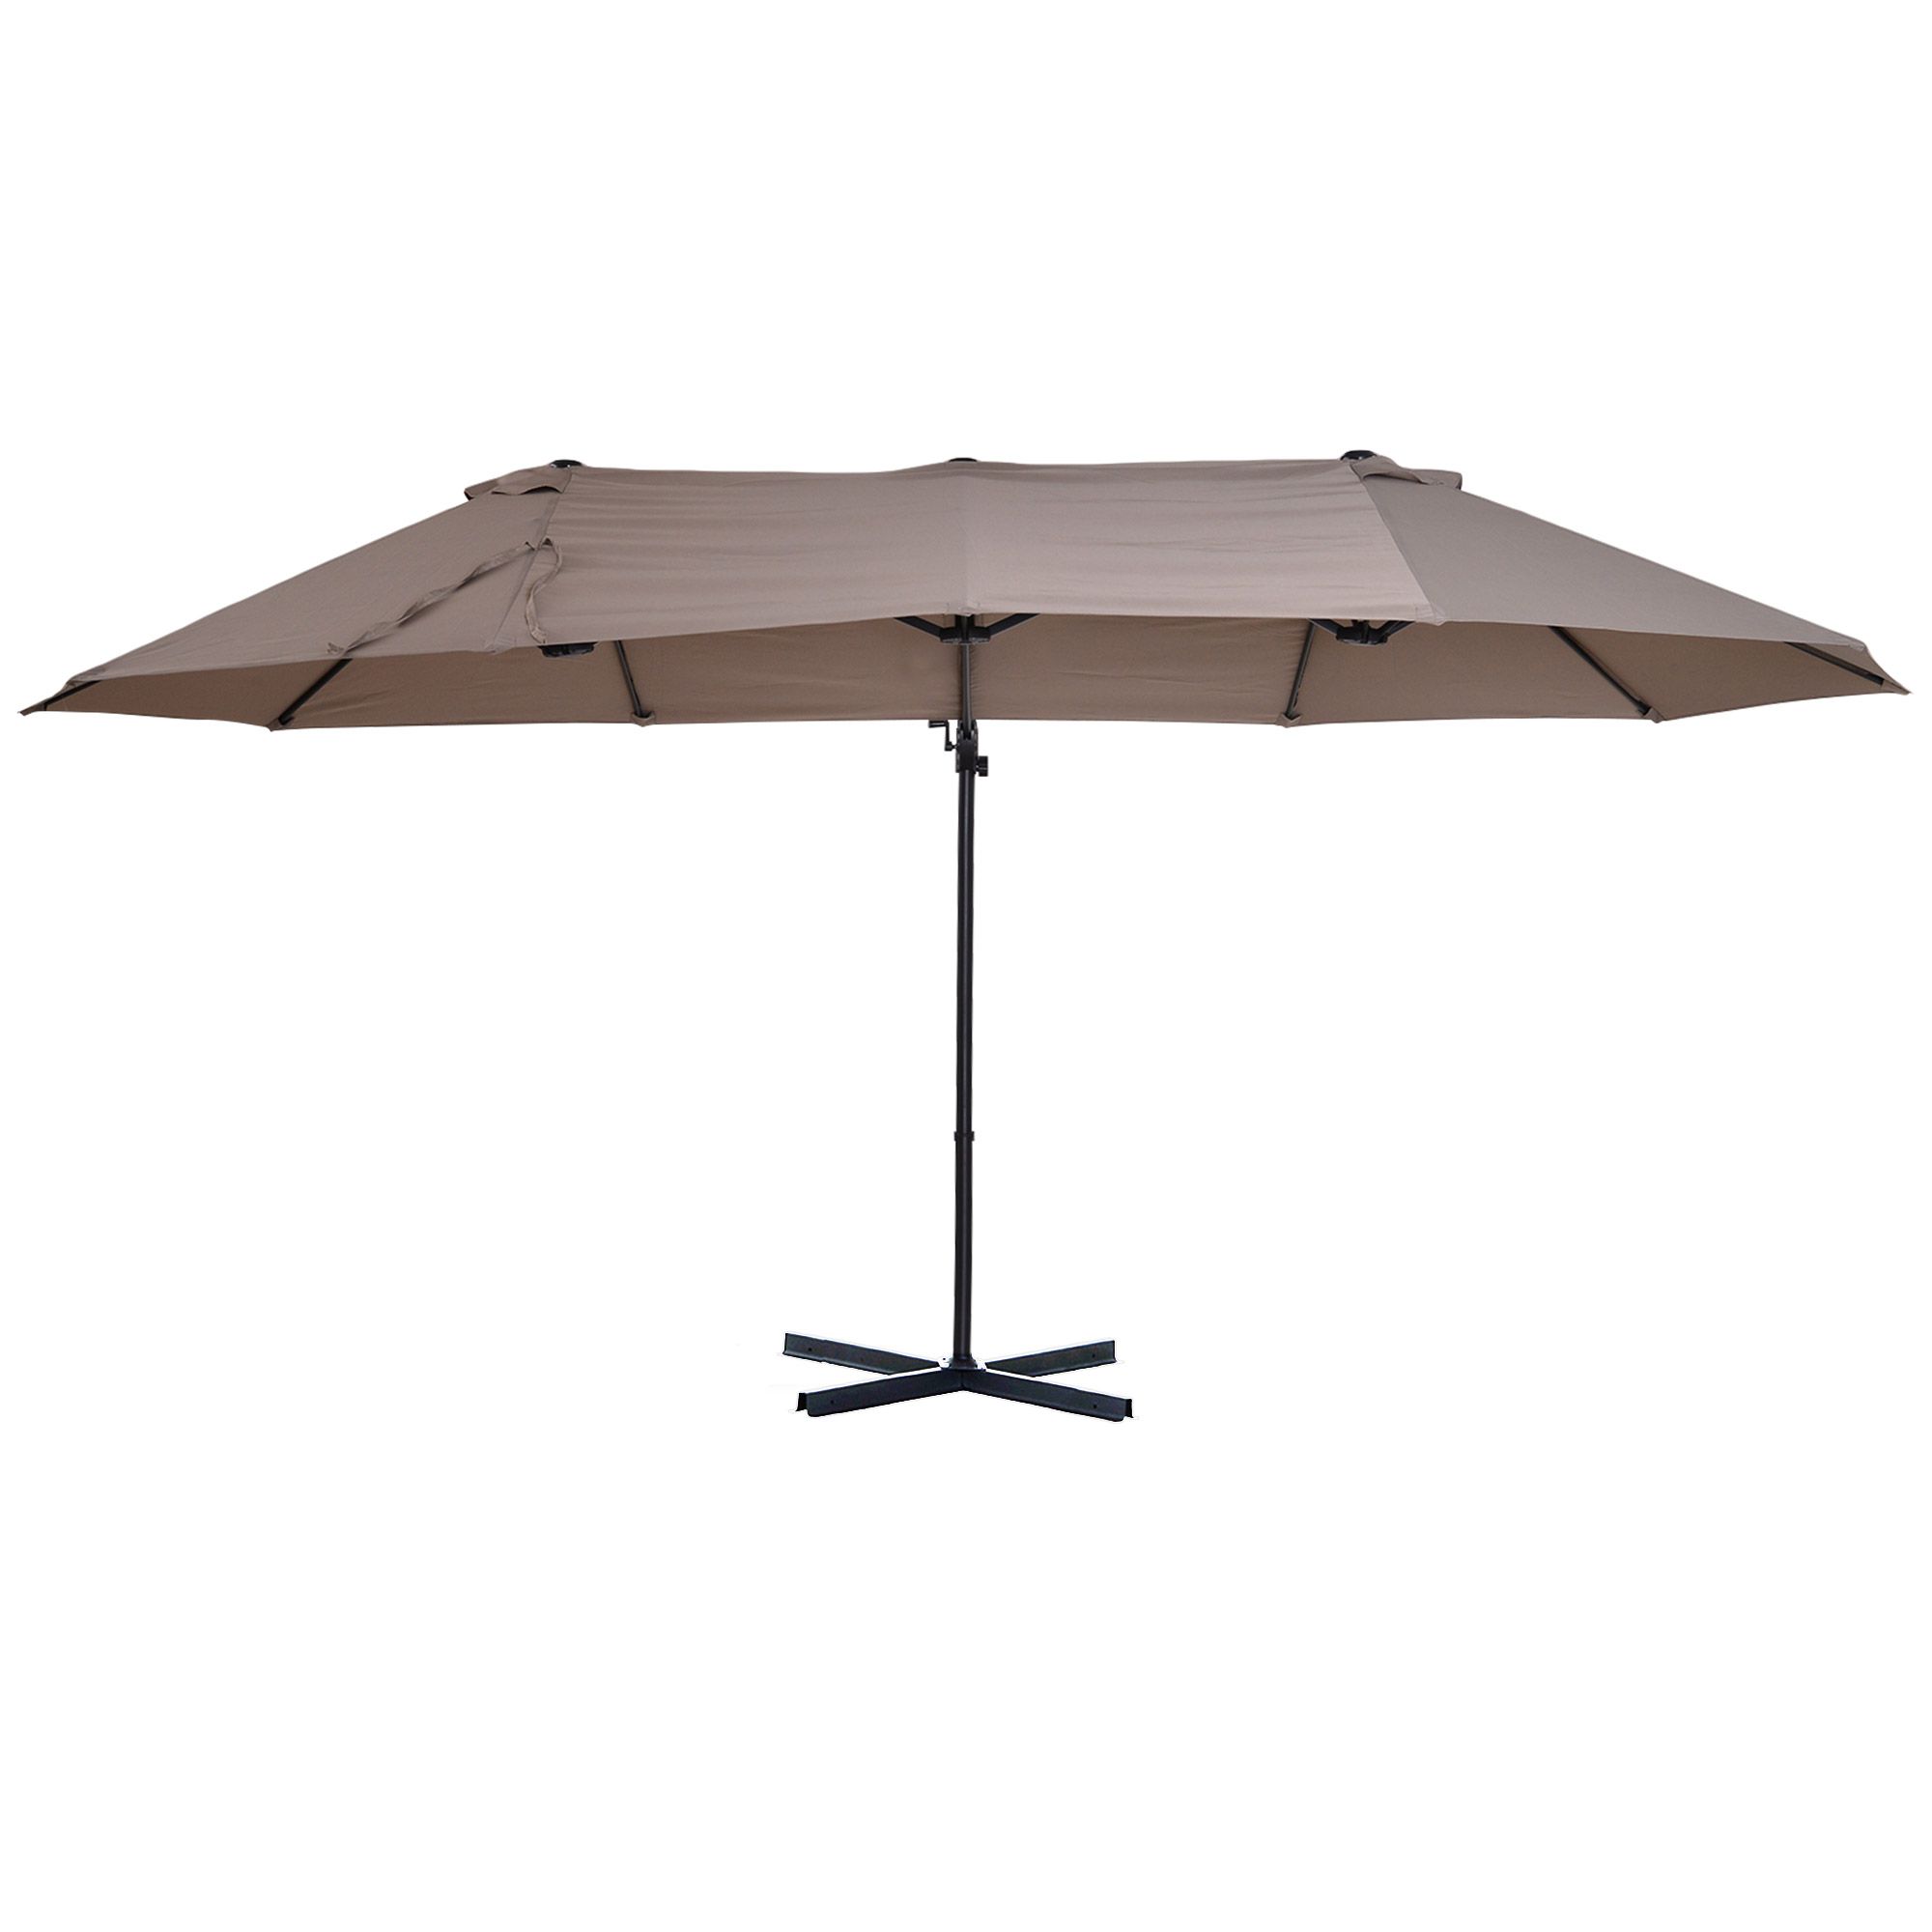 Outsunny Double Canopy Offset Parasol Umbrella Garden Shade With 12 Support Ribs Crank Handle Easy Lift Twin Canopy Brown